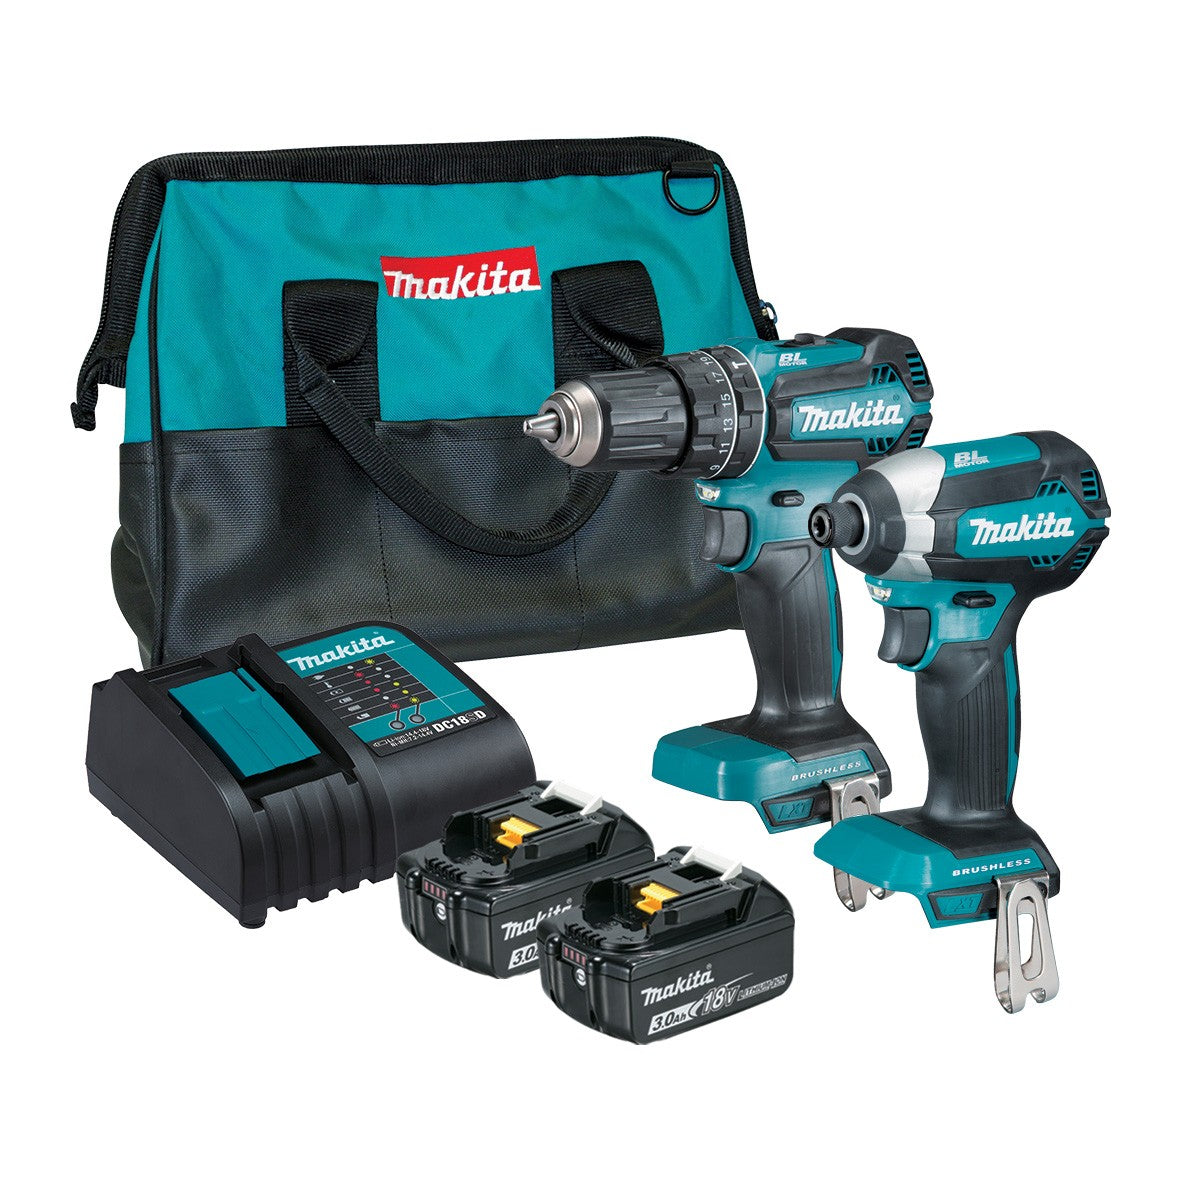 2Pce 18V 3.0Ah Brushless Hammer Drill + Impact Driver Kit DLX2283S by Makita